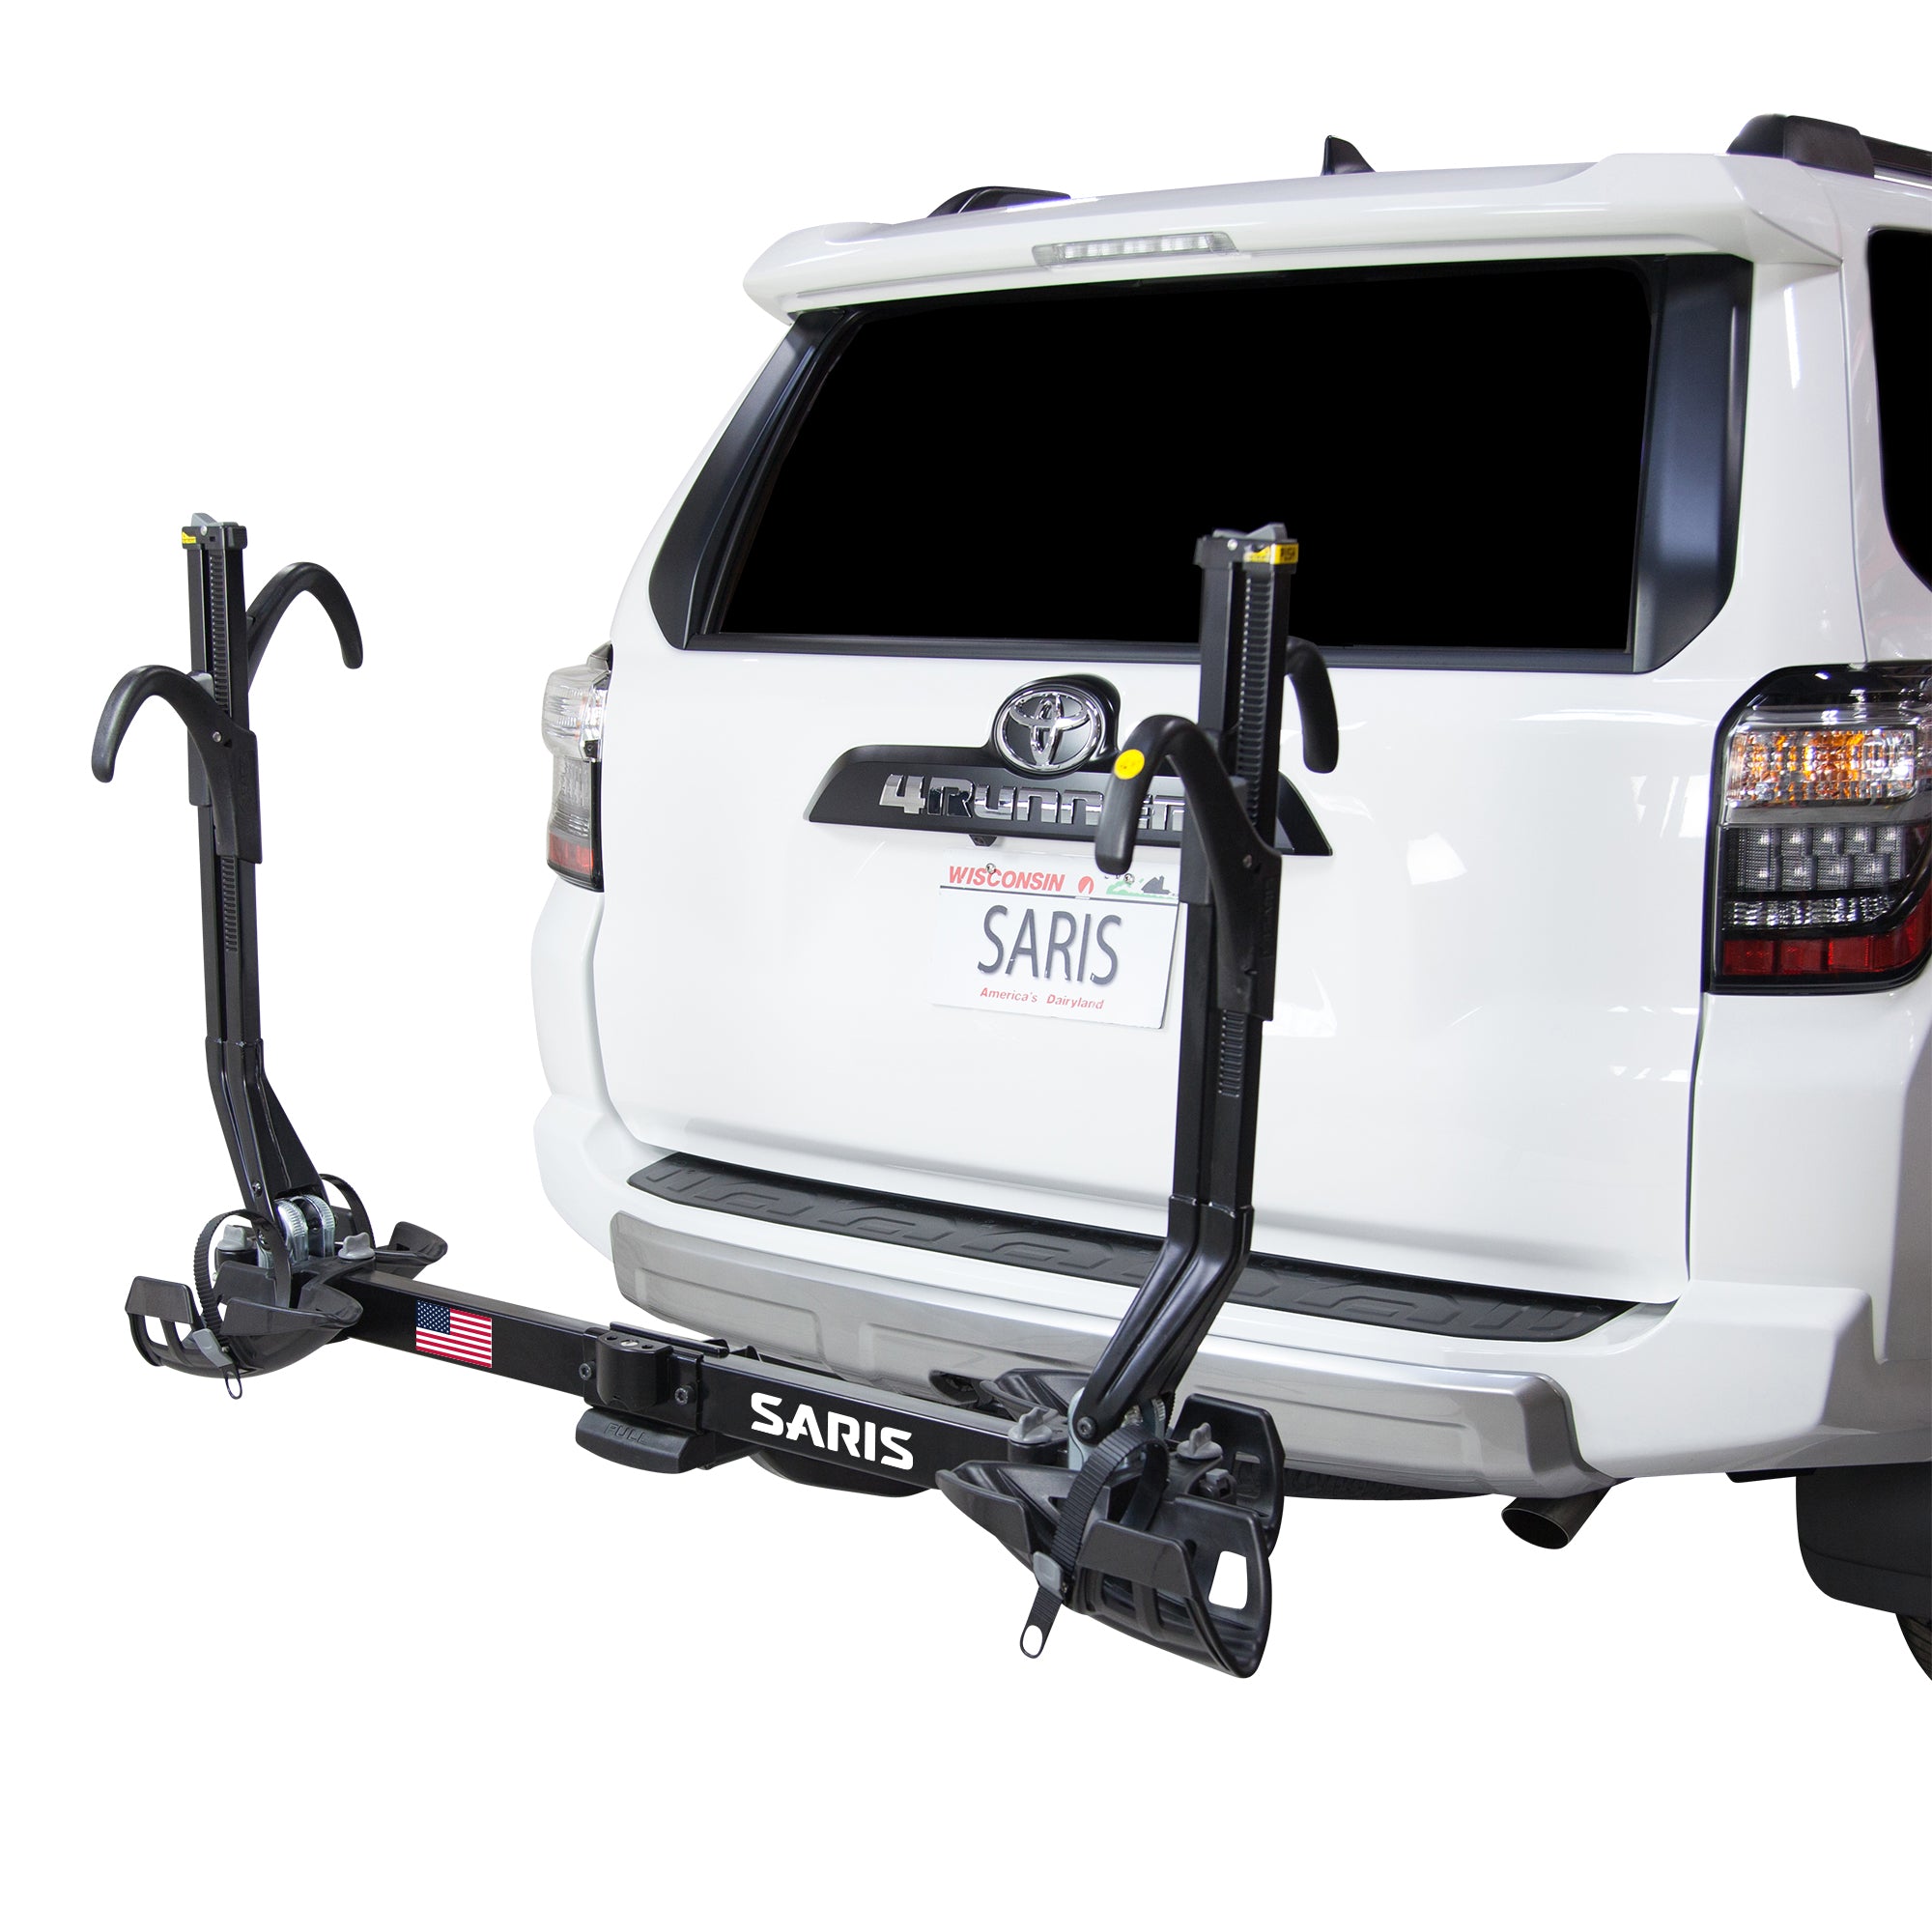 Bike Accessories Towing systems Online Shop